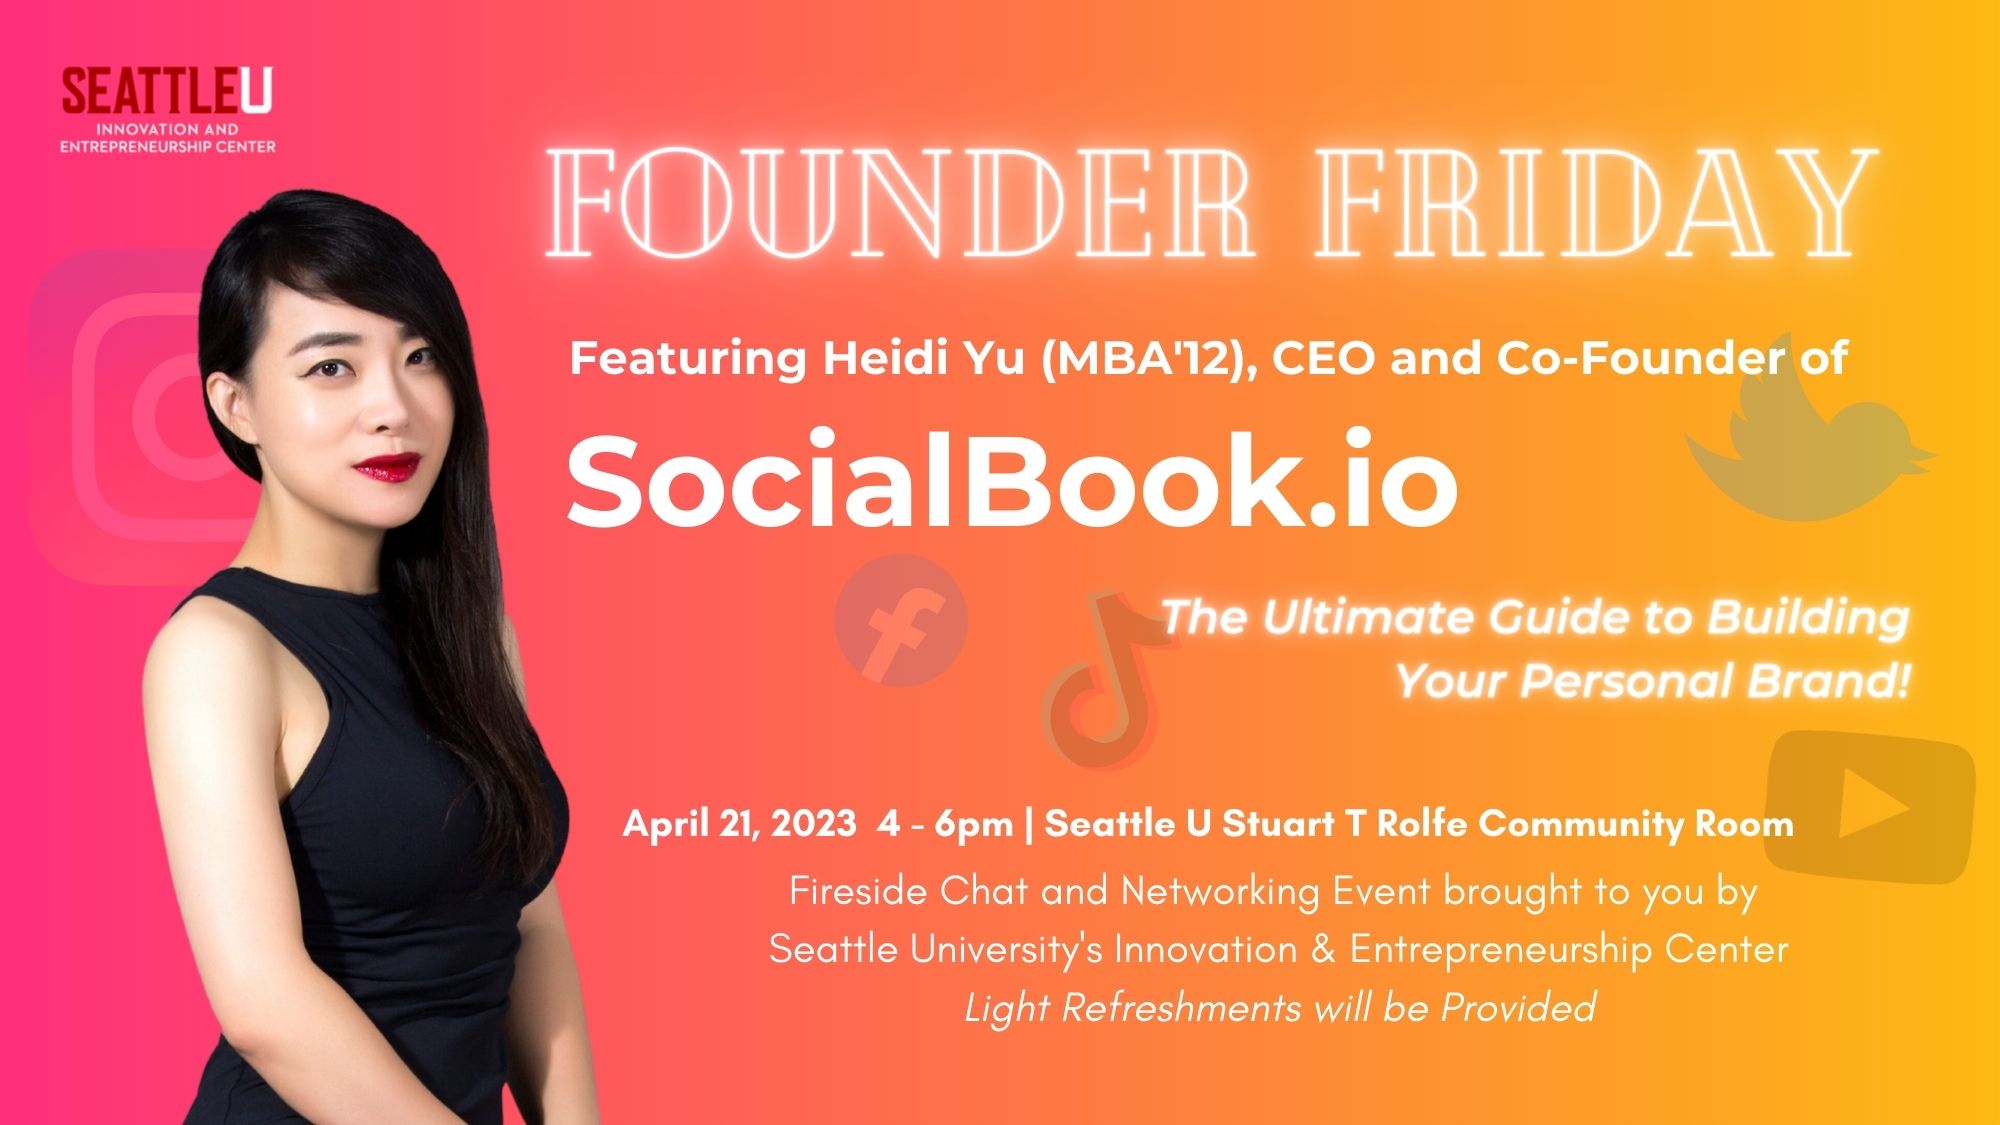 Event header for the Founder Friday with Heidi Yu on April 21, 2023 about her company SocialBook.io